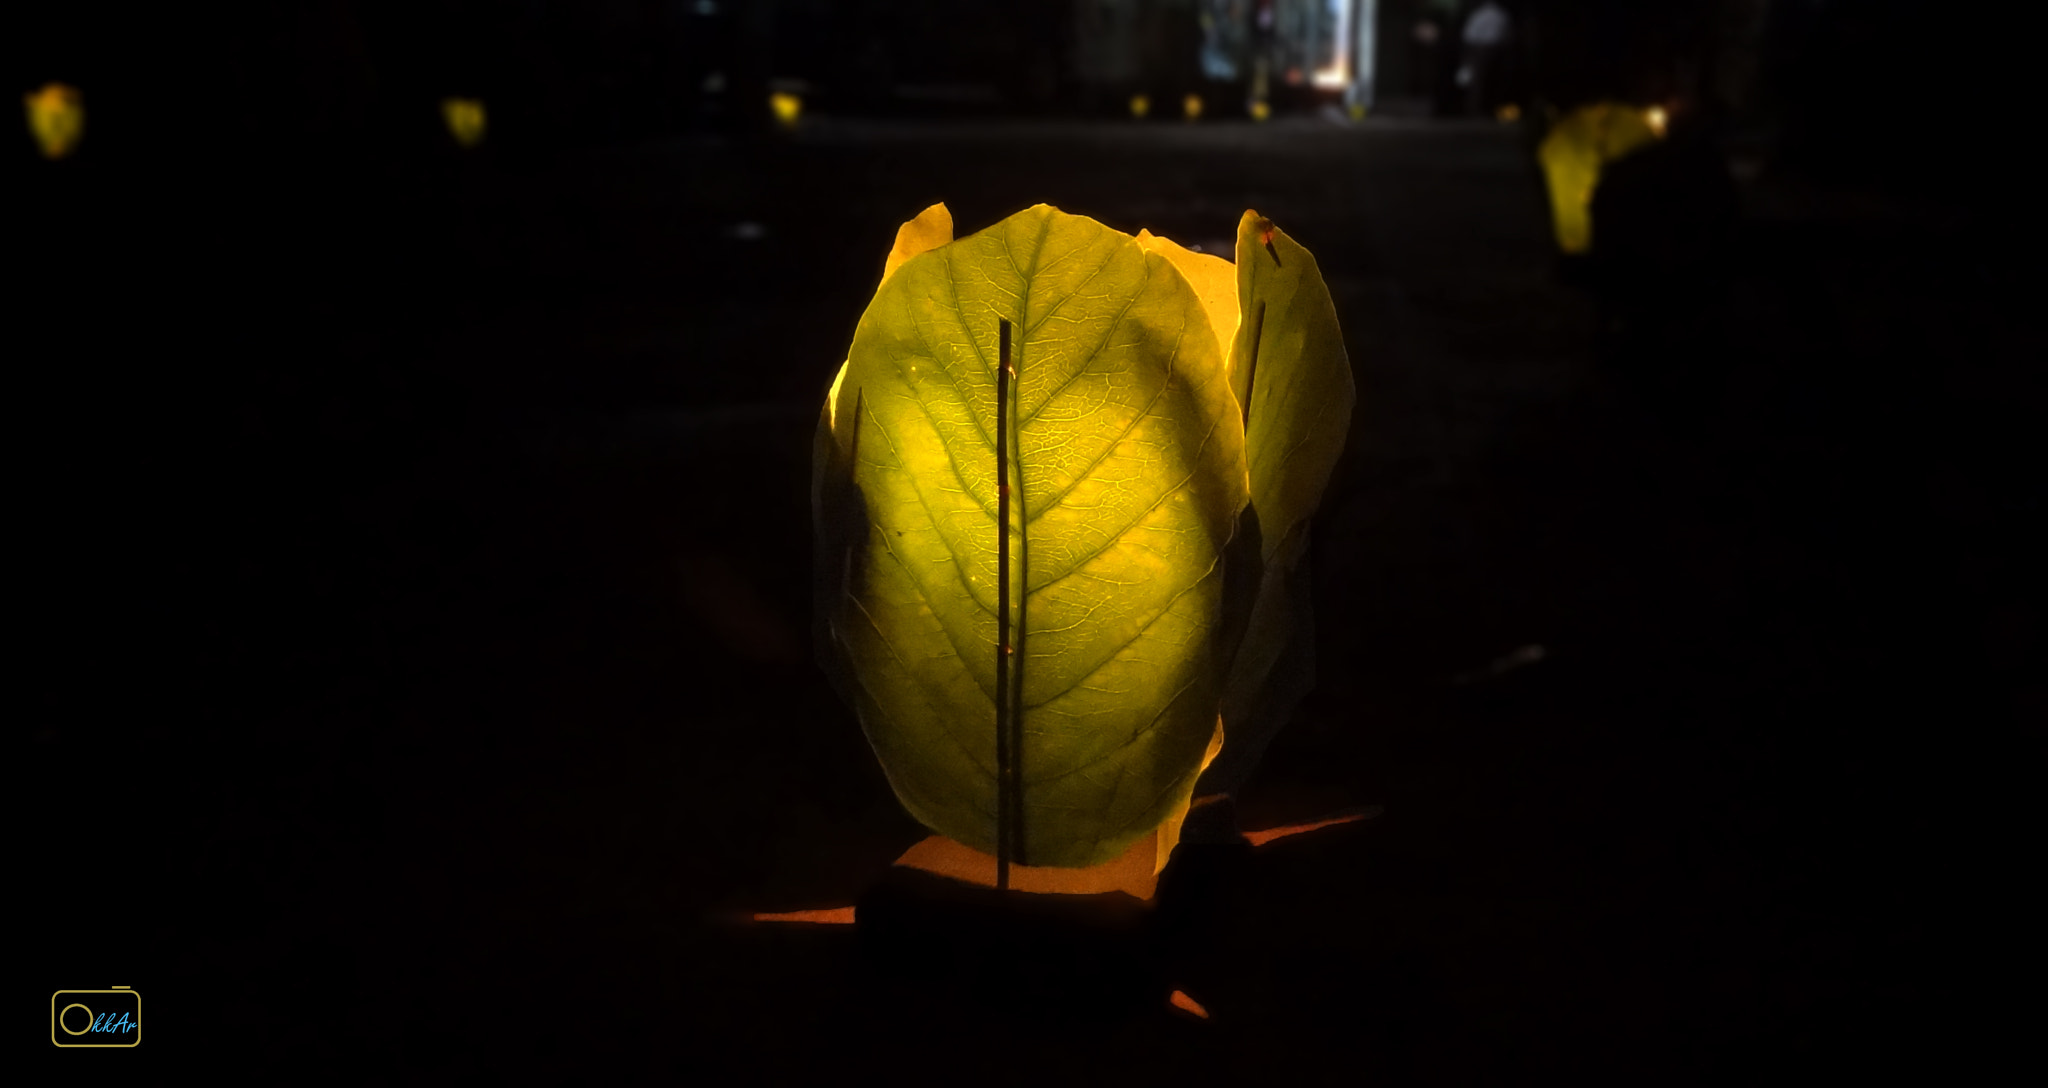 Sony DSC-WX30 sample photo. The leaf light photography